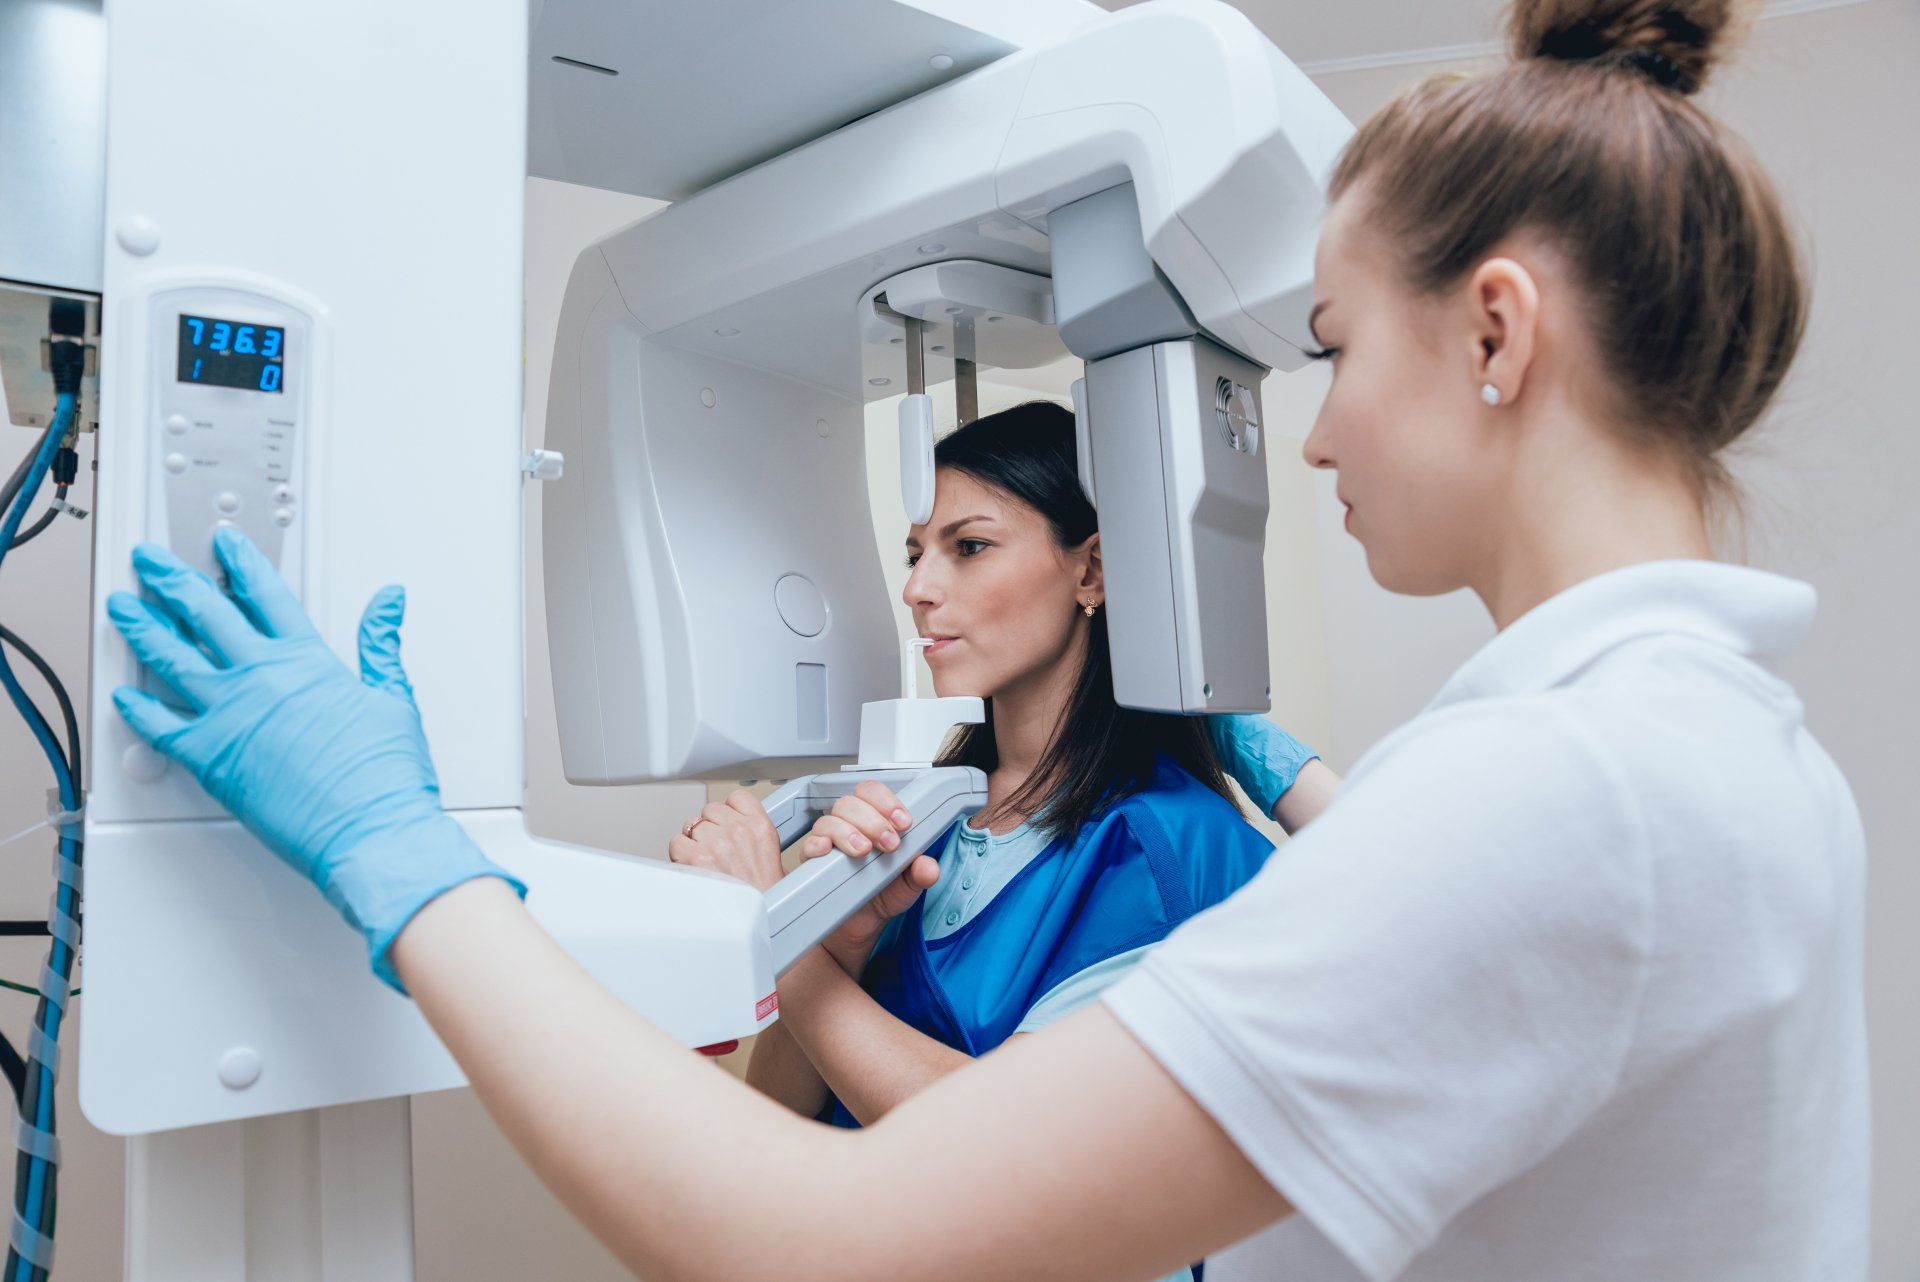 Dental technology | x ray machine | dentist near you | female patient getting an x ray | Curity Dental Care | Dentist in East York | Dentist at Victoria and Eglinton